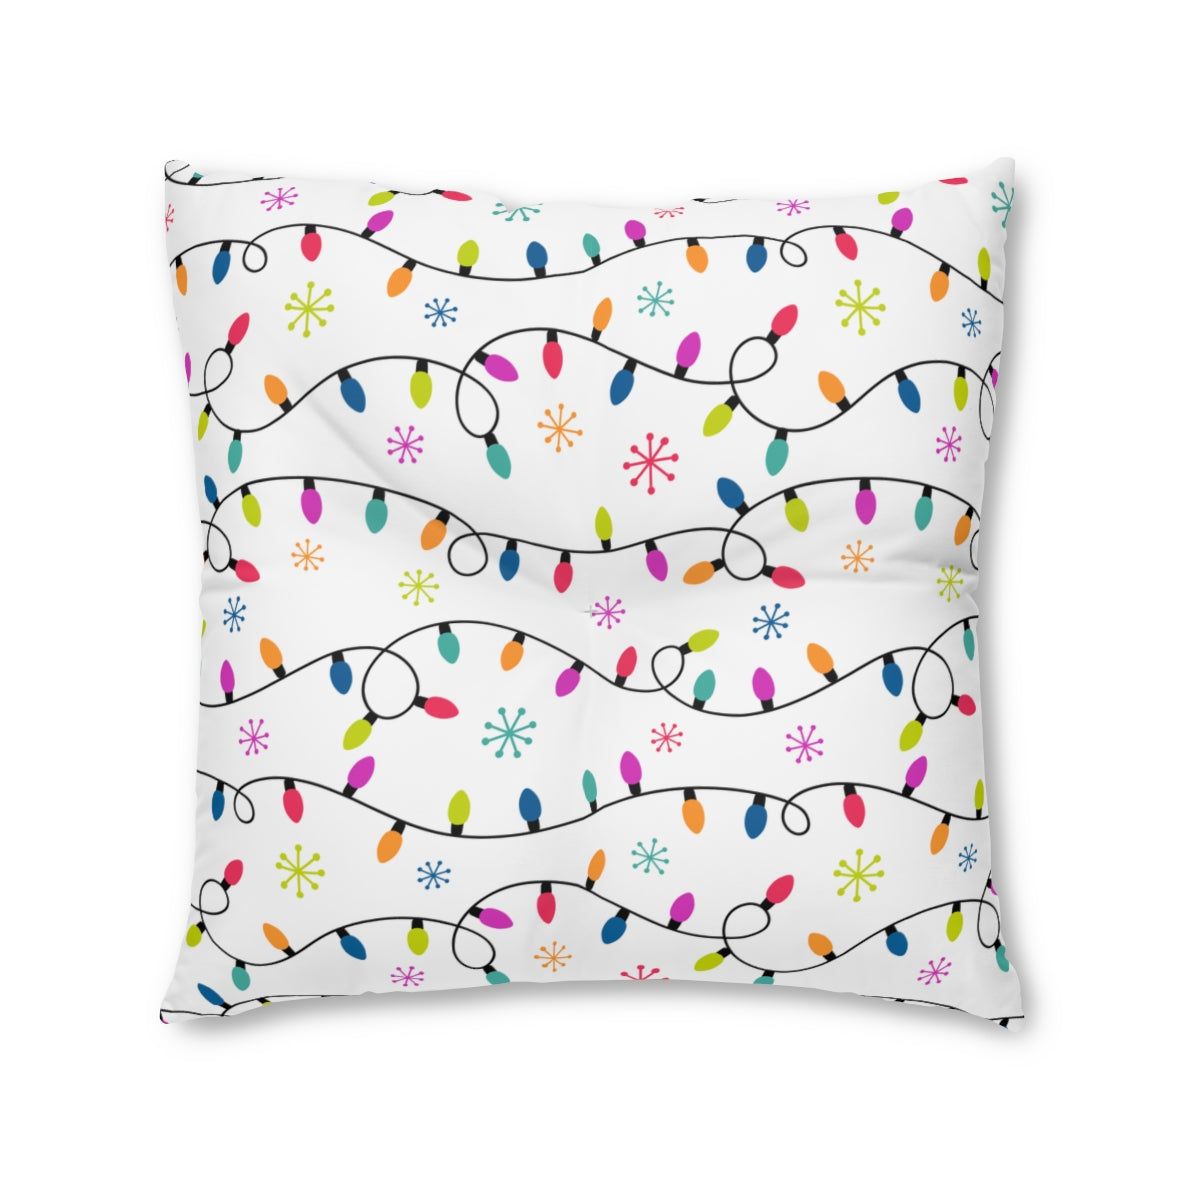 Christmas Lights Tufted Floor Pillow, Square